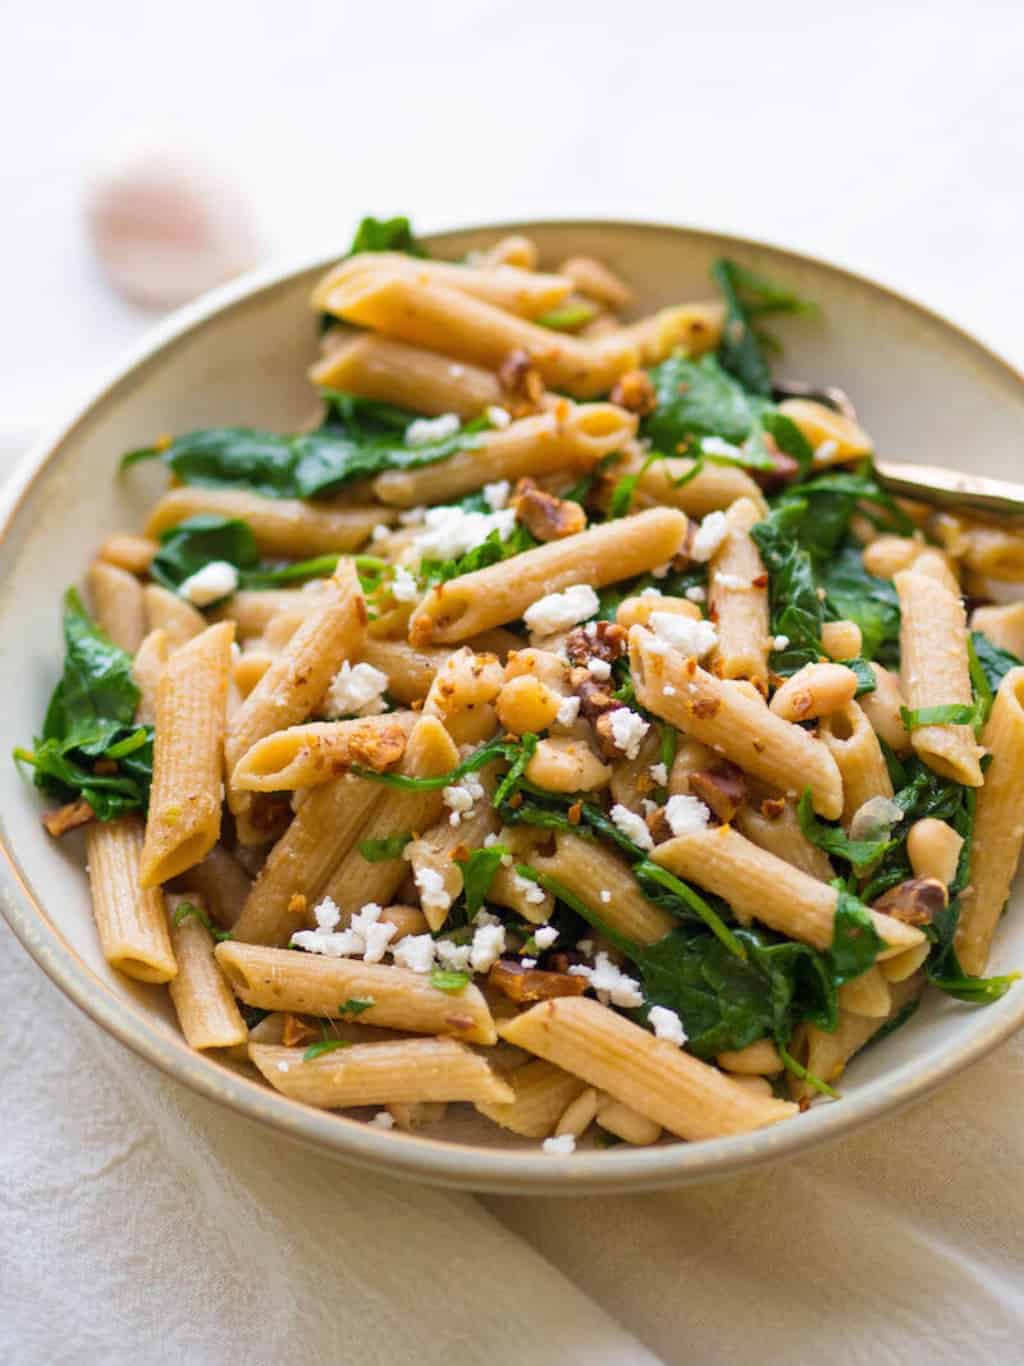 A pasta dish with colorful greens